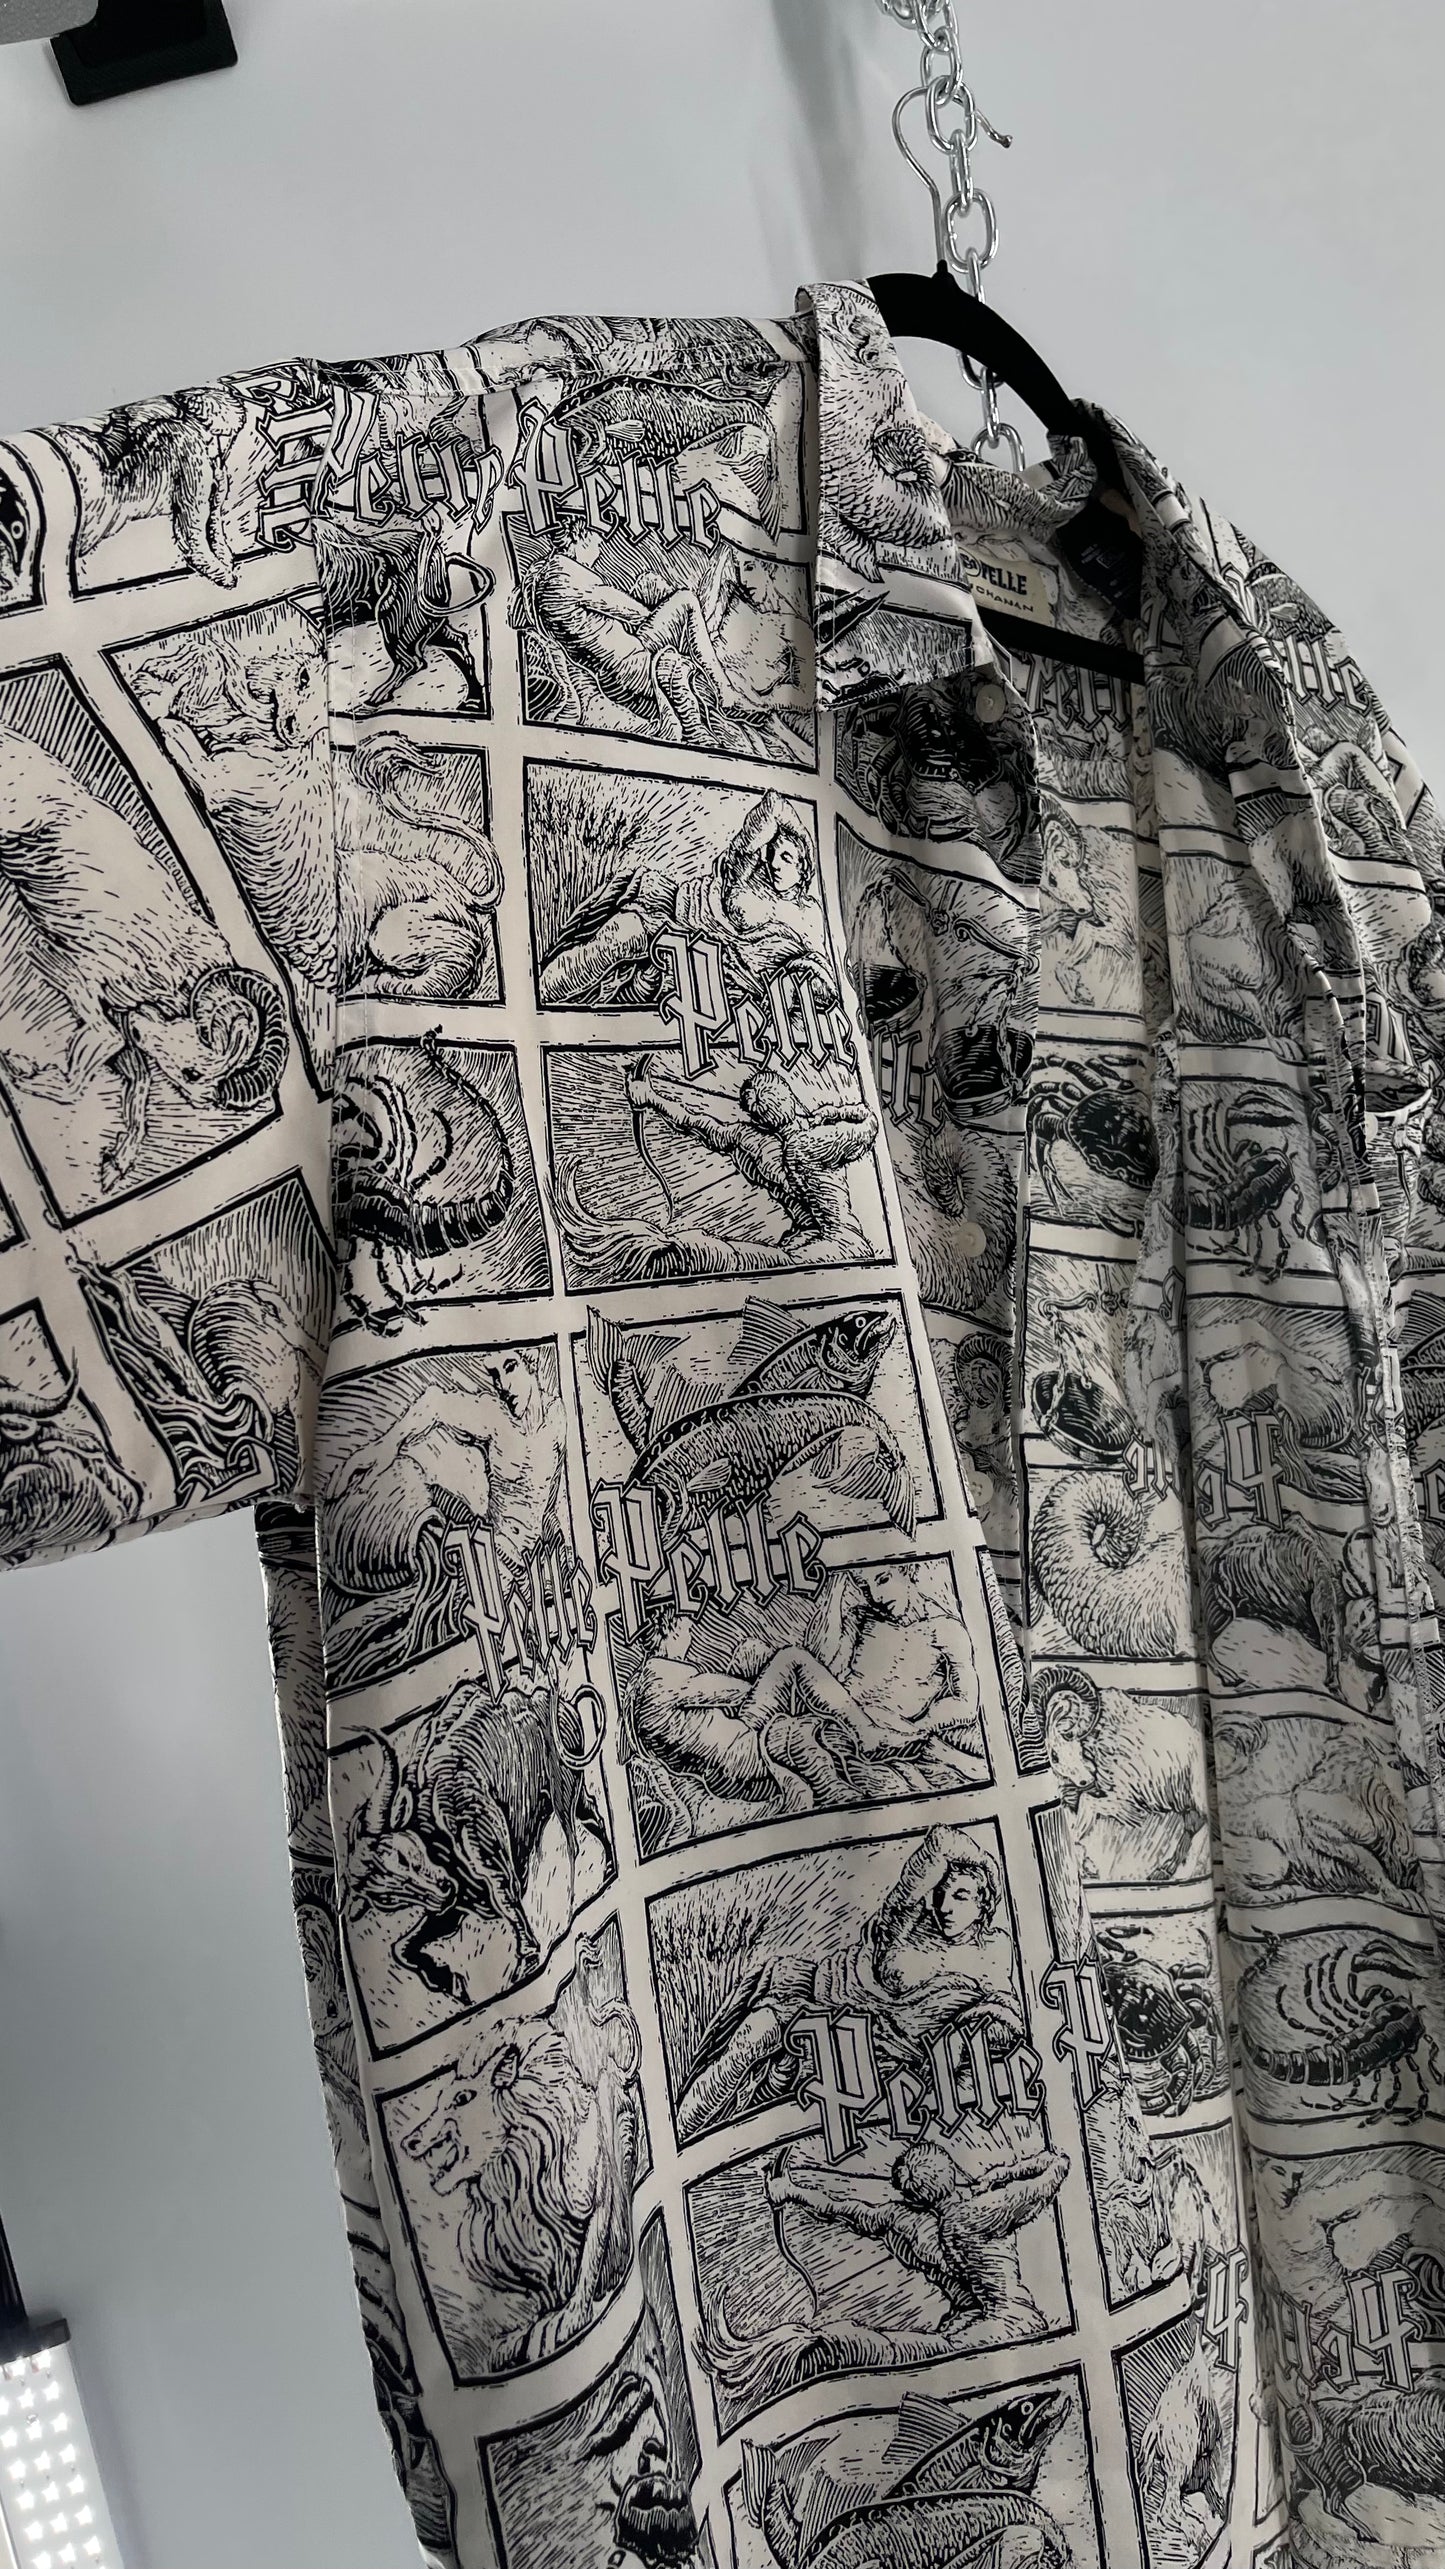 Extremely Rare Vintage PELLE PELLE Zodiac Astrology Comic Strip Graphic Long Sleeve Button Up (3X)